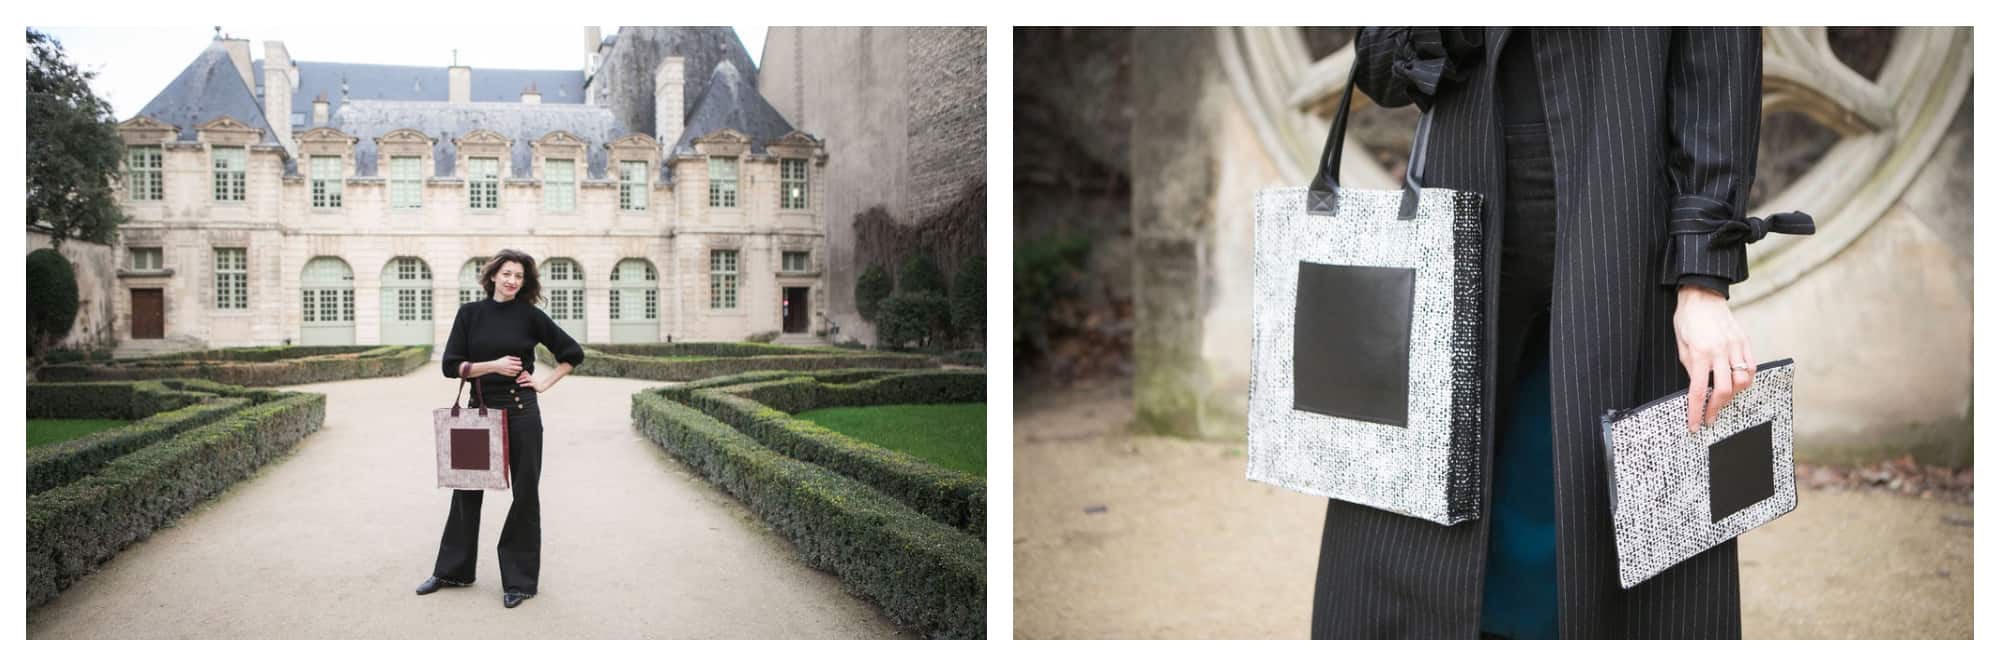 On left: Kasia Dietz, founder of her eponymous handbag line, enjoys a walk through the gardens of Hôtel de Sully in Paris' Marais neighborhood. On right: a model wears a Kasia Dietz black and white tote bag with a clutch to match. 